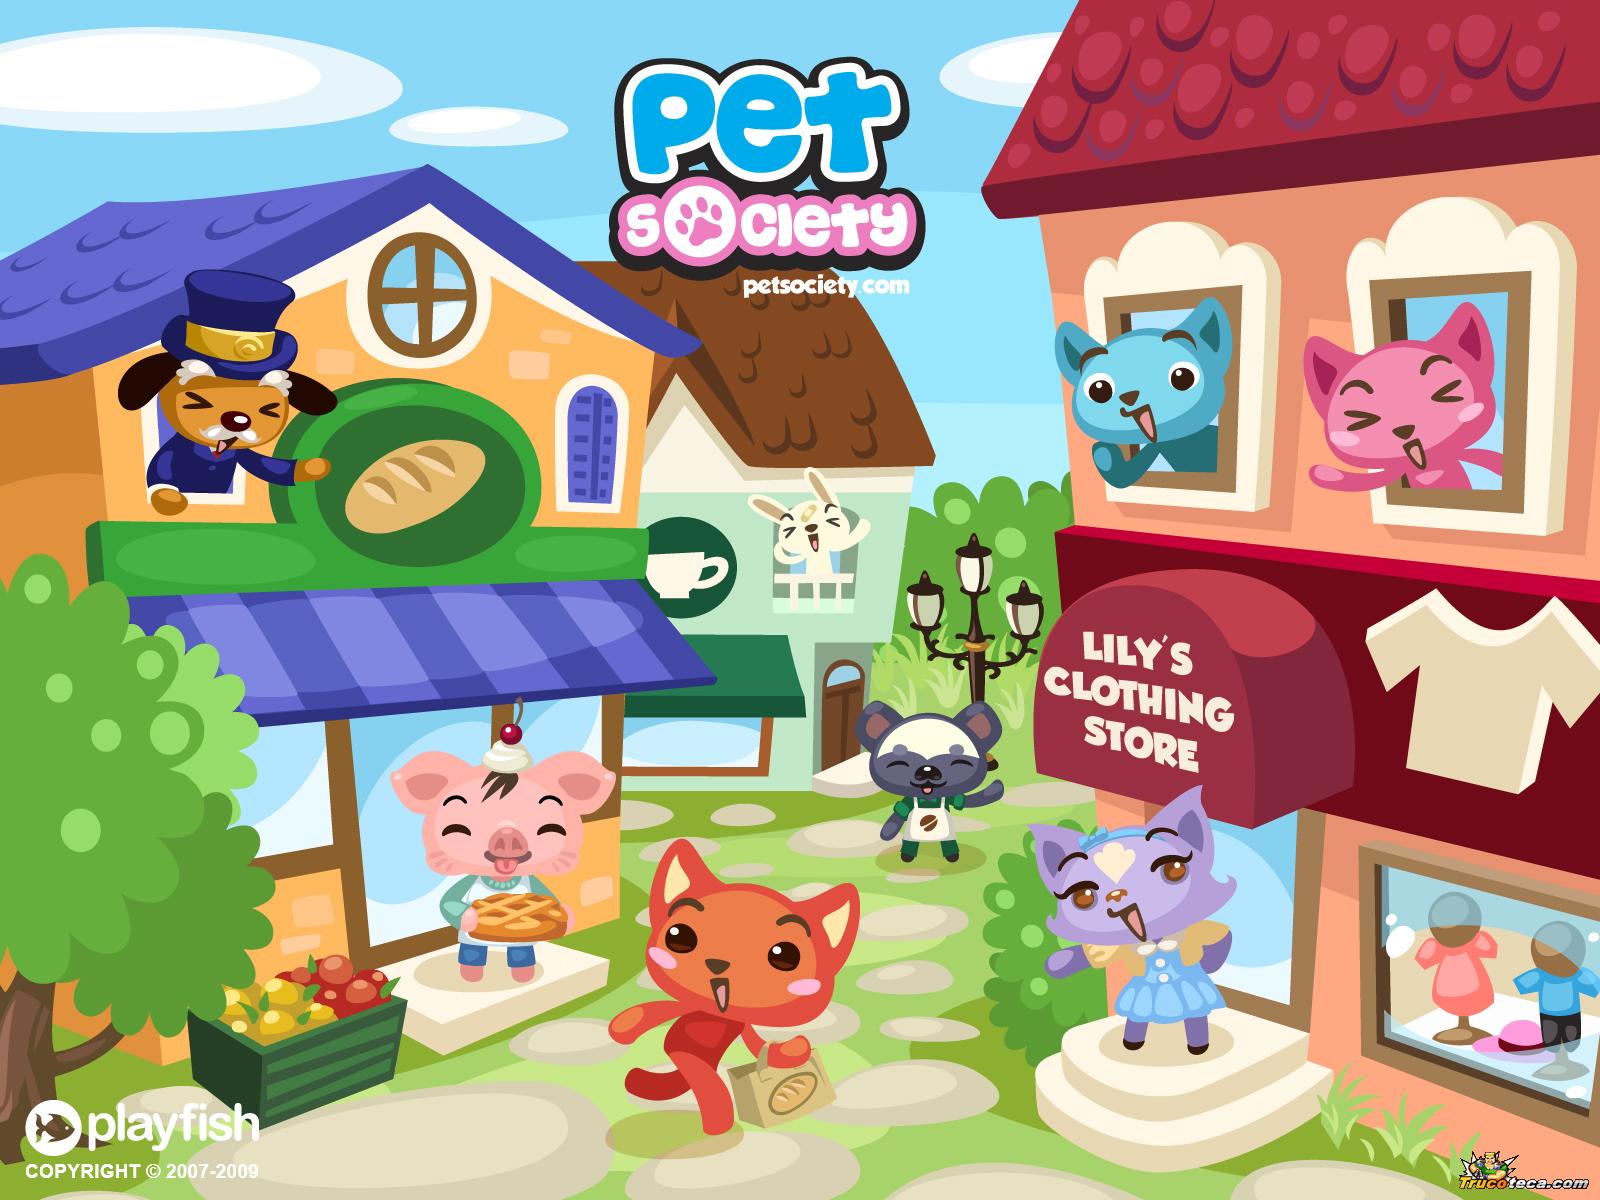 Pet Society Details LaunchBox Games Database